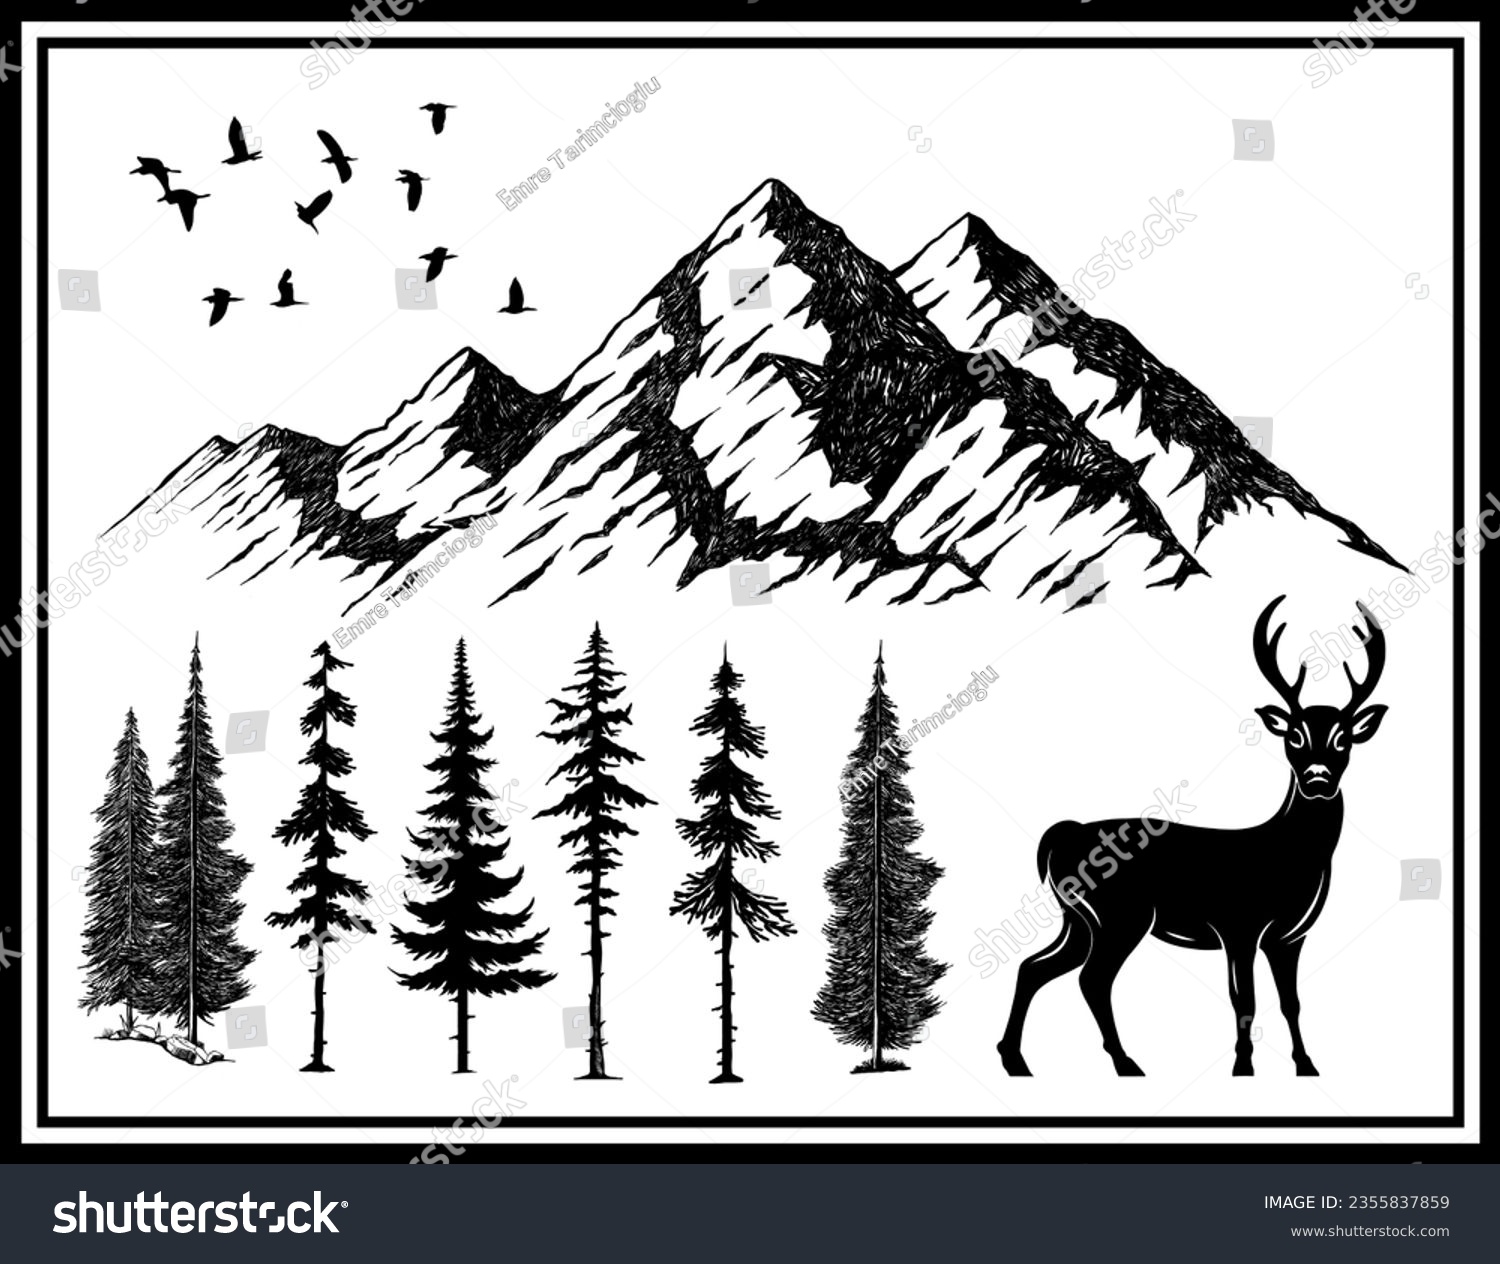 SVG of Hand Drawn vector illustration of nature mountain pine trees deer board svg